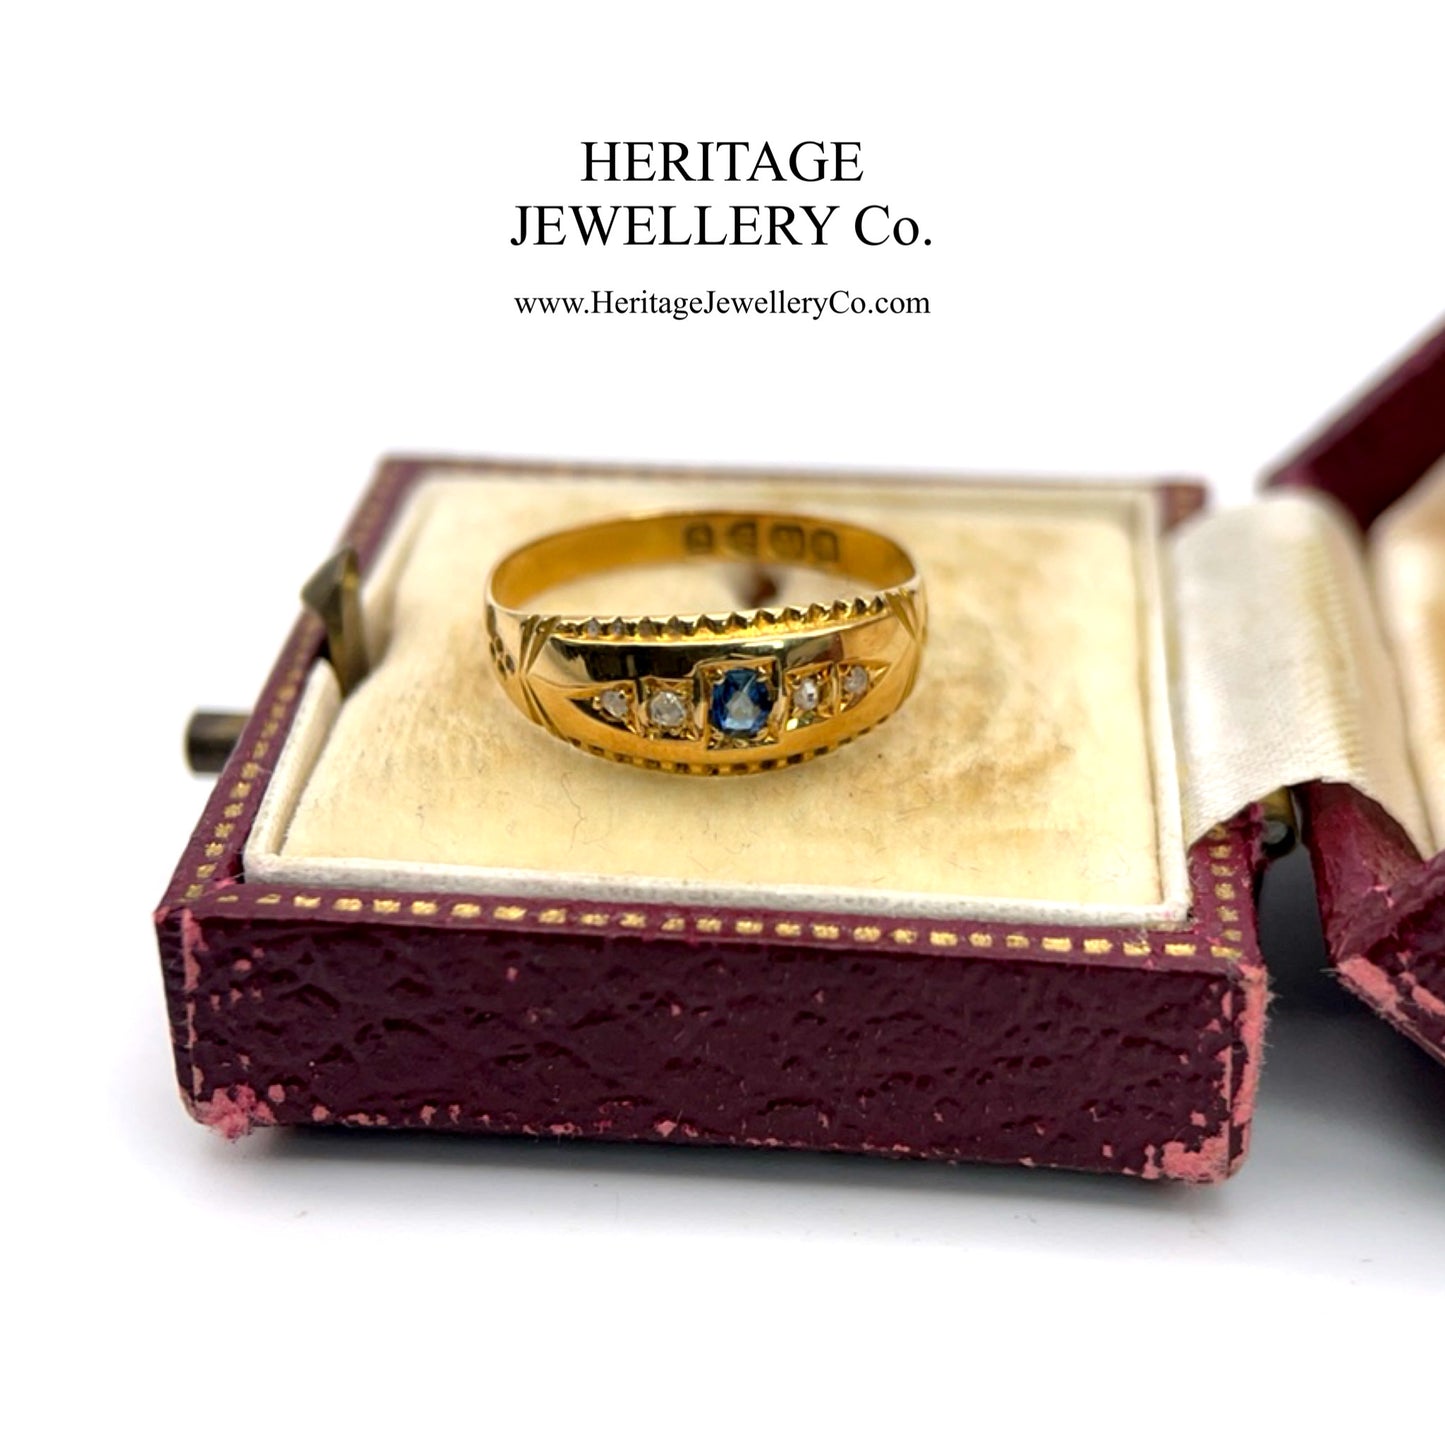 Antique Sapphire and Diamond Gypsy Ring (c. 1899)